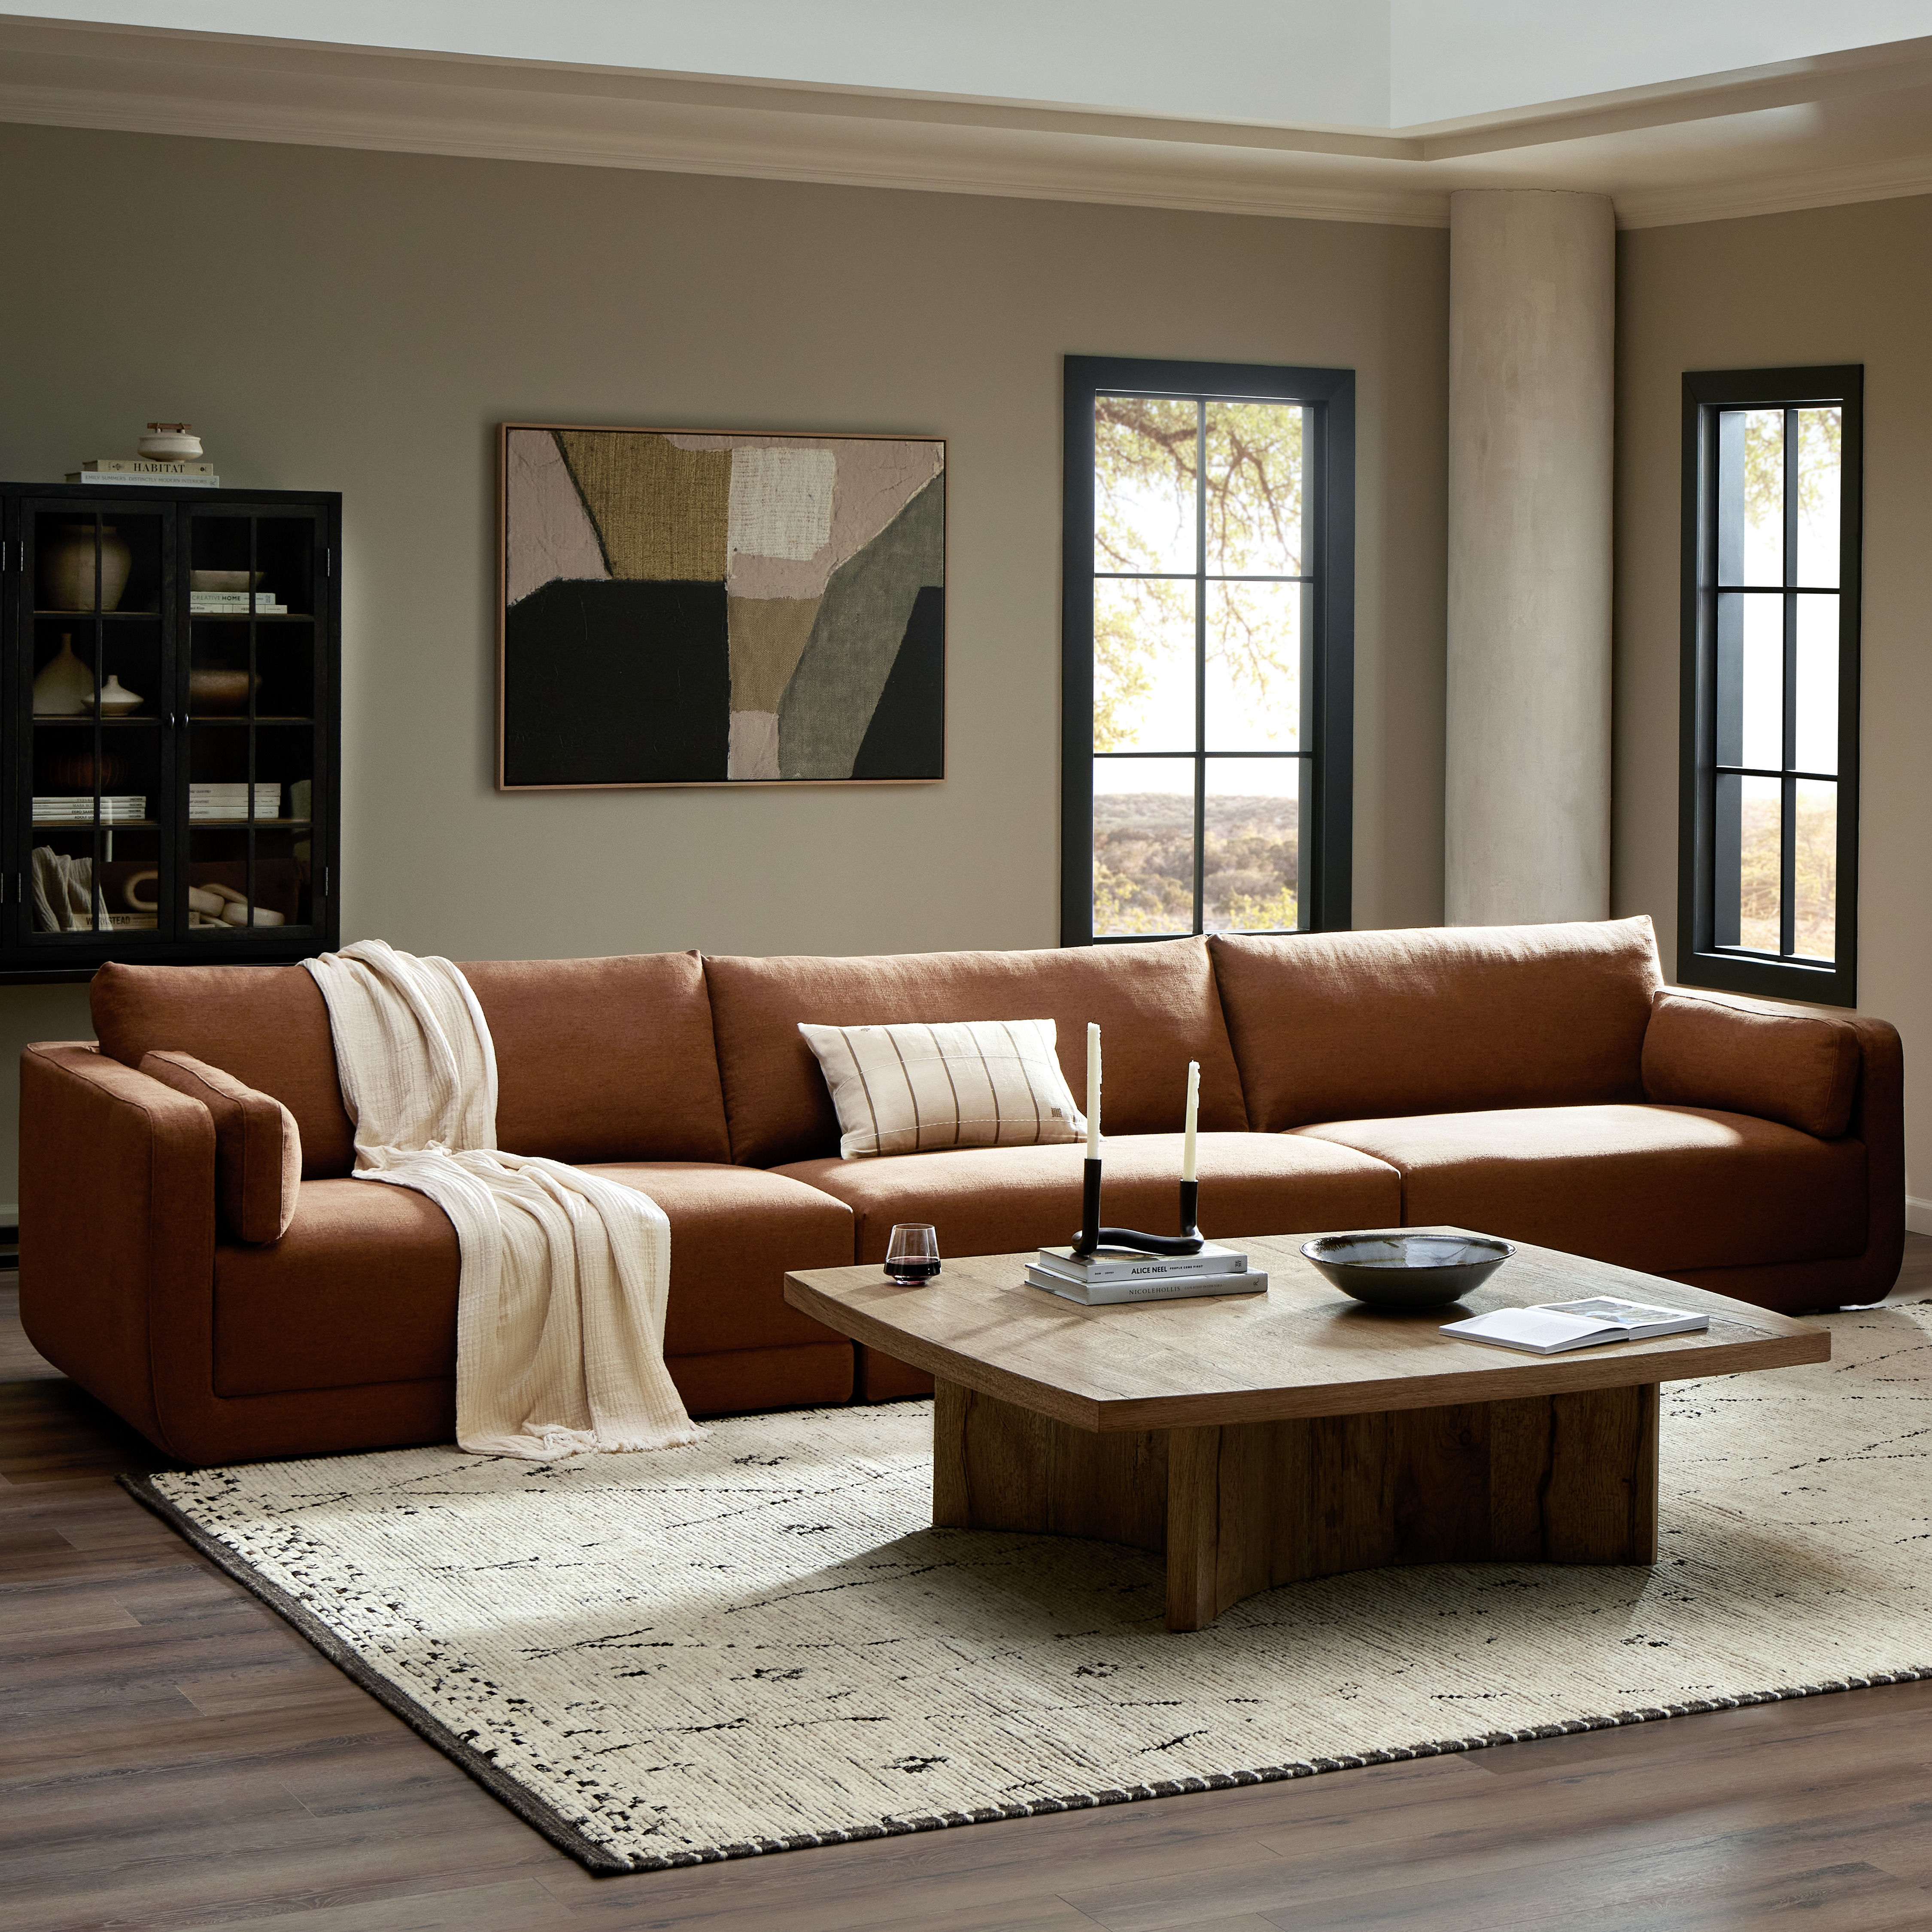 Toland 3pc Sectional-153"-Bartin Rust - Image 5